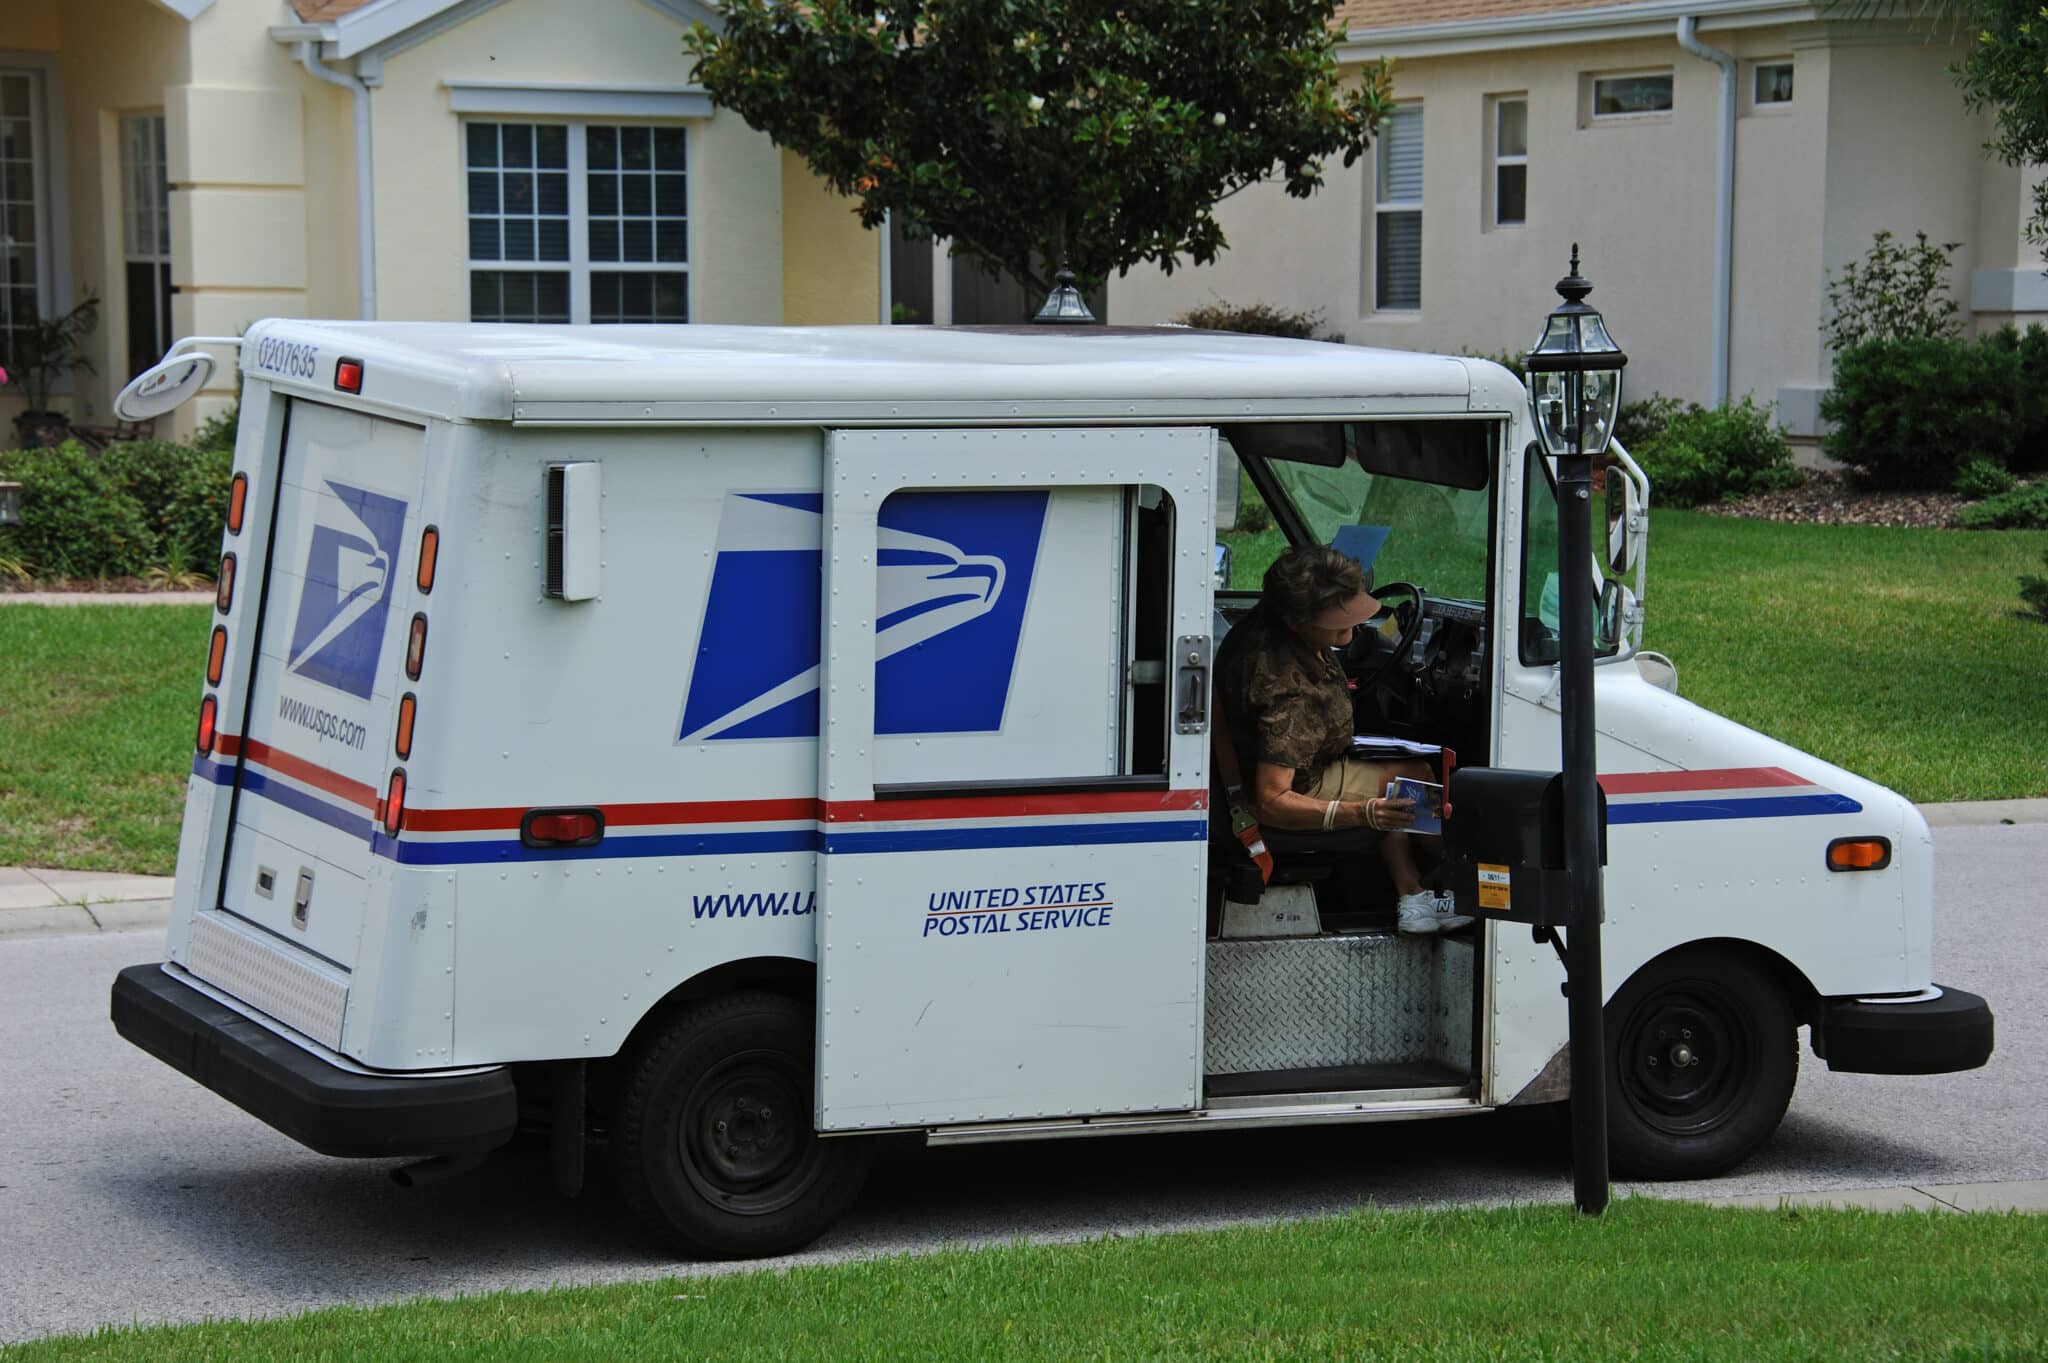 $50,000 reward offered for information on robbery of mail carrier in Augusta